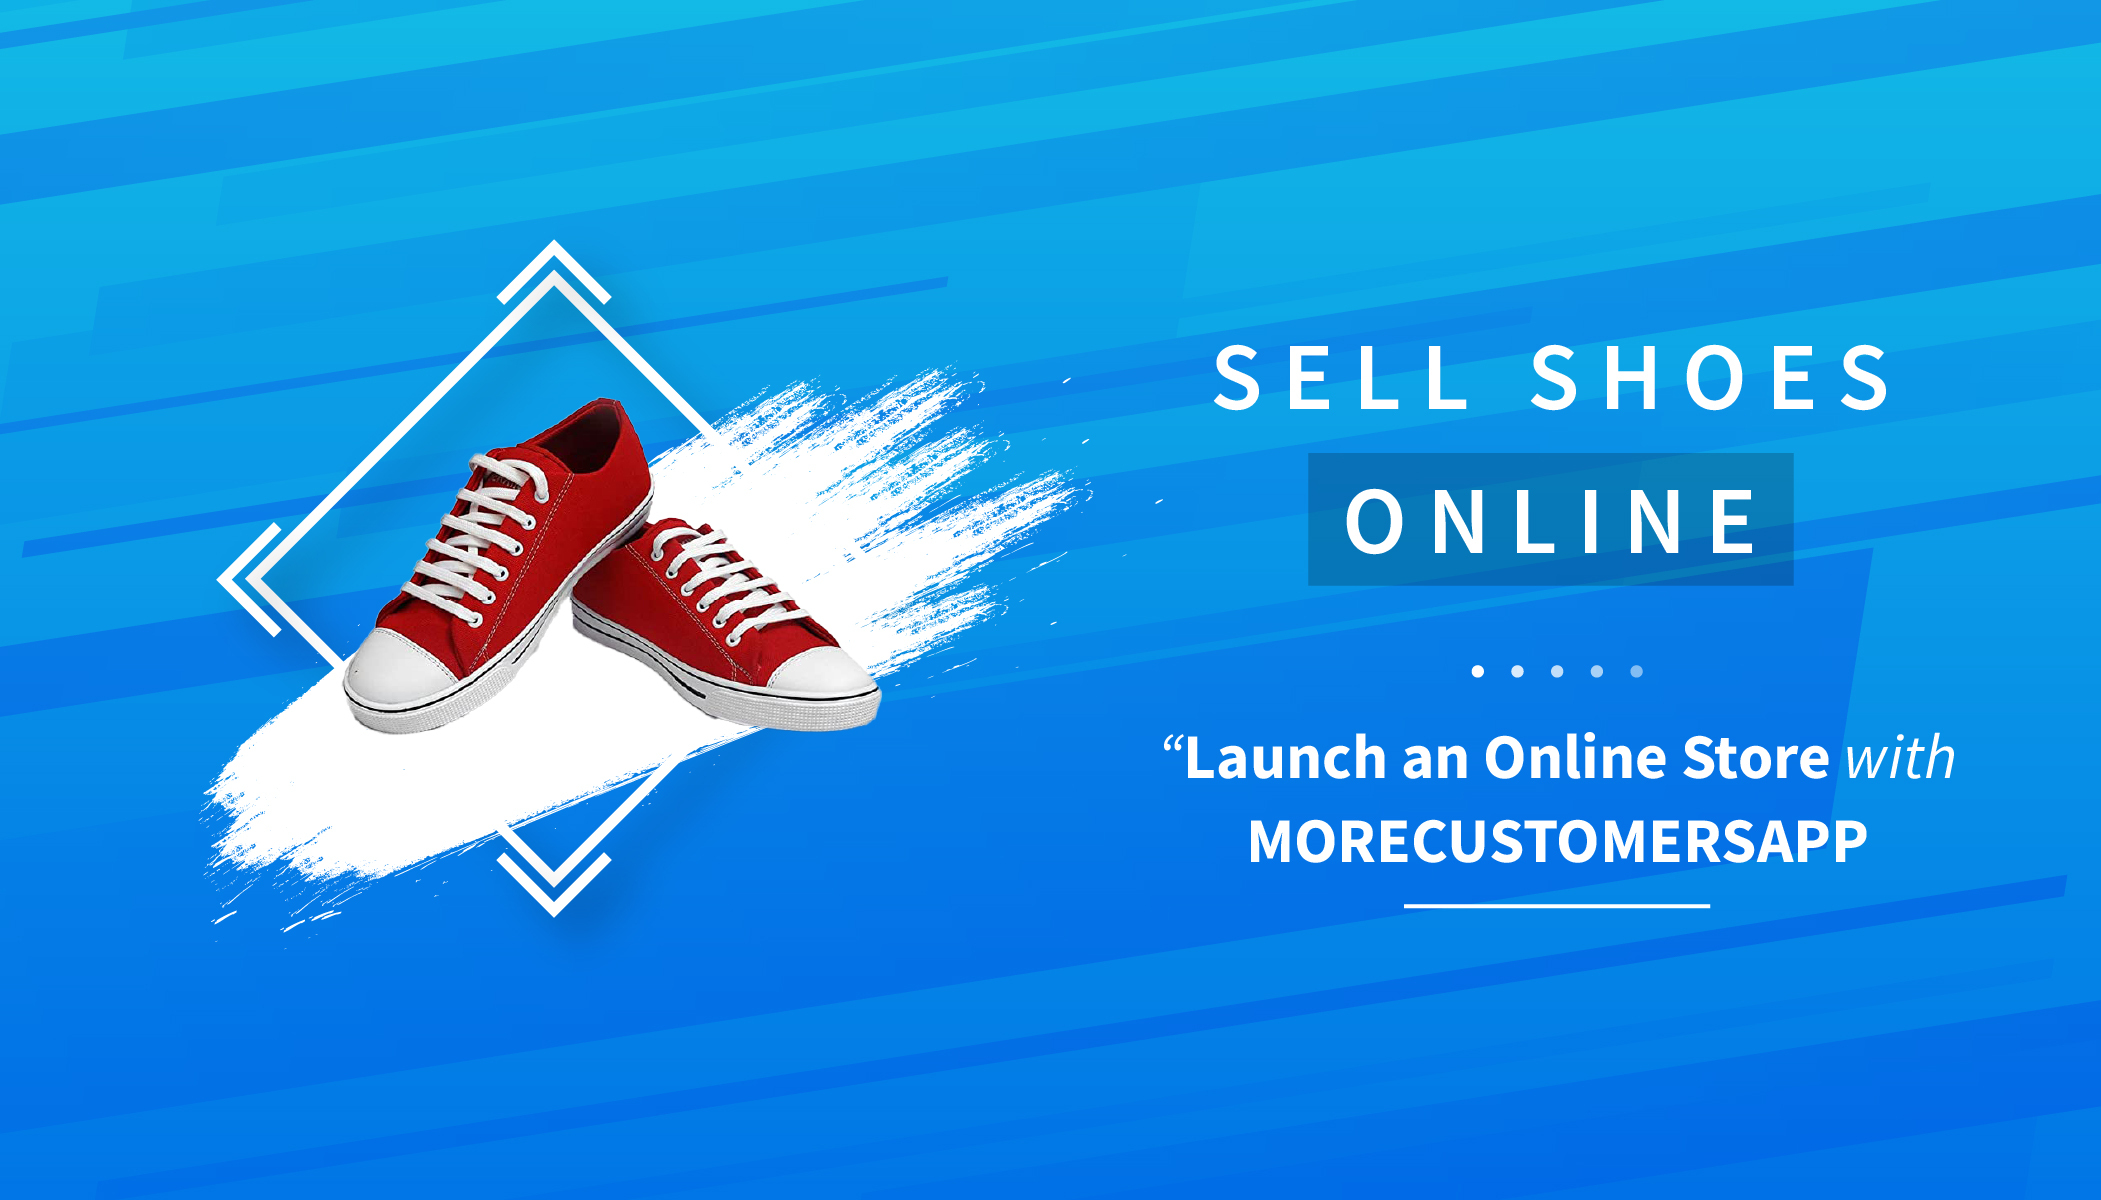 How to sell shoes online